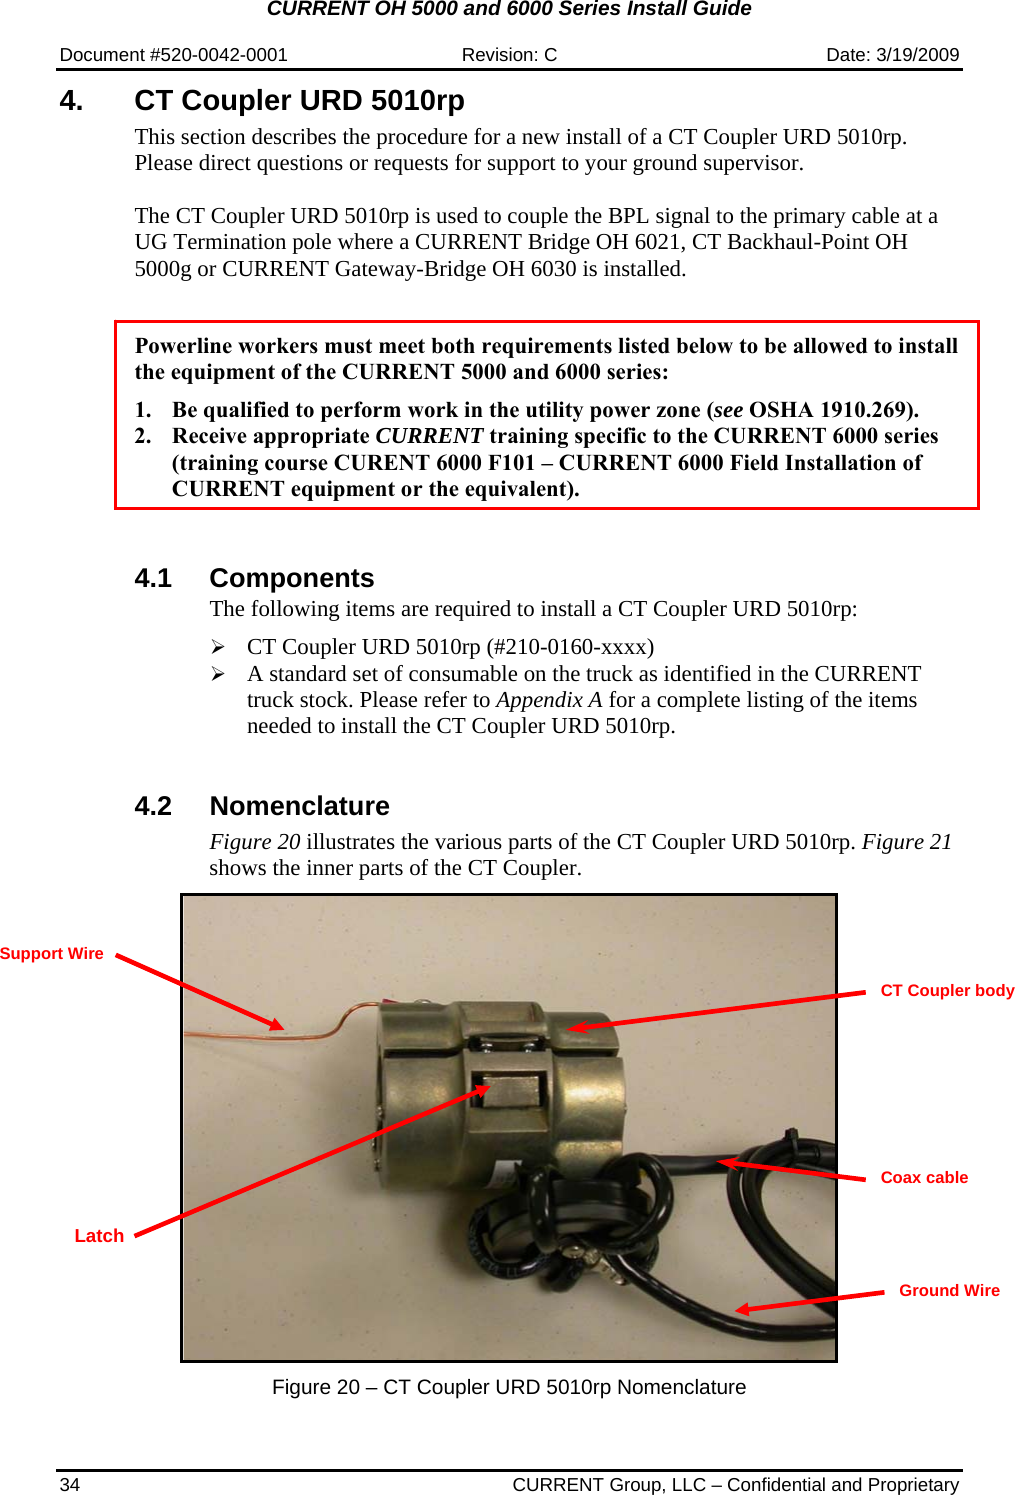 CURRENT OH 5000 and 6000 Series Install Guide  Document #520-0042-0001  Revision: C  Date: 3/19/2009 34  CURRENT Group, LLC – Confidential and Proprietary 4.  CT Coupler URD 5010rp This section describes the procedure for a new install of a CT Coupler URD 5010rp. Please direct questions or requests for support to your ground supervisor.  The CT Coupler URD 5010rp is used to couple the BPL signal to the primary cable at a UG Termination pole where a CURRENT Bridge OH 6021, CT Backhaul-Point OH 5000g or CURRENT Gateway-Bridge OH 6030 is installed.   Powerline workers must meet both requirements listed below to be allowed to install the equipment of the CURRENT 5000 and 6000 series:  1. Be qualified to perform work in the utility power zone (see OSHA 1910.269). 2. Receive appropriate CURRENT training specific to the CURRENT 6000 series (training course CURENT 6000 F101 – CURRENT 6000 Field Installation of CURRENT equipment or the equivalent).     4.1 Components The following items are required to install a CT Coupler URD 5010rp:  ¾ CT Coupler URD 5010rp (#210-0160-xxxx) ¾ A standard set of consumable on the truck as identified in the CURRENT truck stock. Please refer to Appendix A for a complete listing of the items needed to install the CT Coupler URD 5010rp.   4.2 Nomenclature Figure 20 illustrates the various parts of the CT Coupler URD 5010rp. Figure 21 shows the inner parts of the CT Coupler.      Figure 20 – CT Coupler URD 5010rp Nomenclature   Coax cable   CT Coupler body Ground Wire Latch Support Wire 